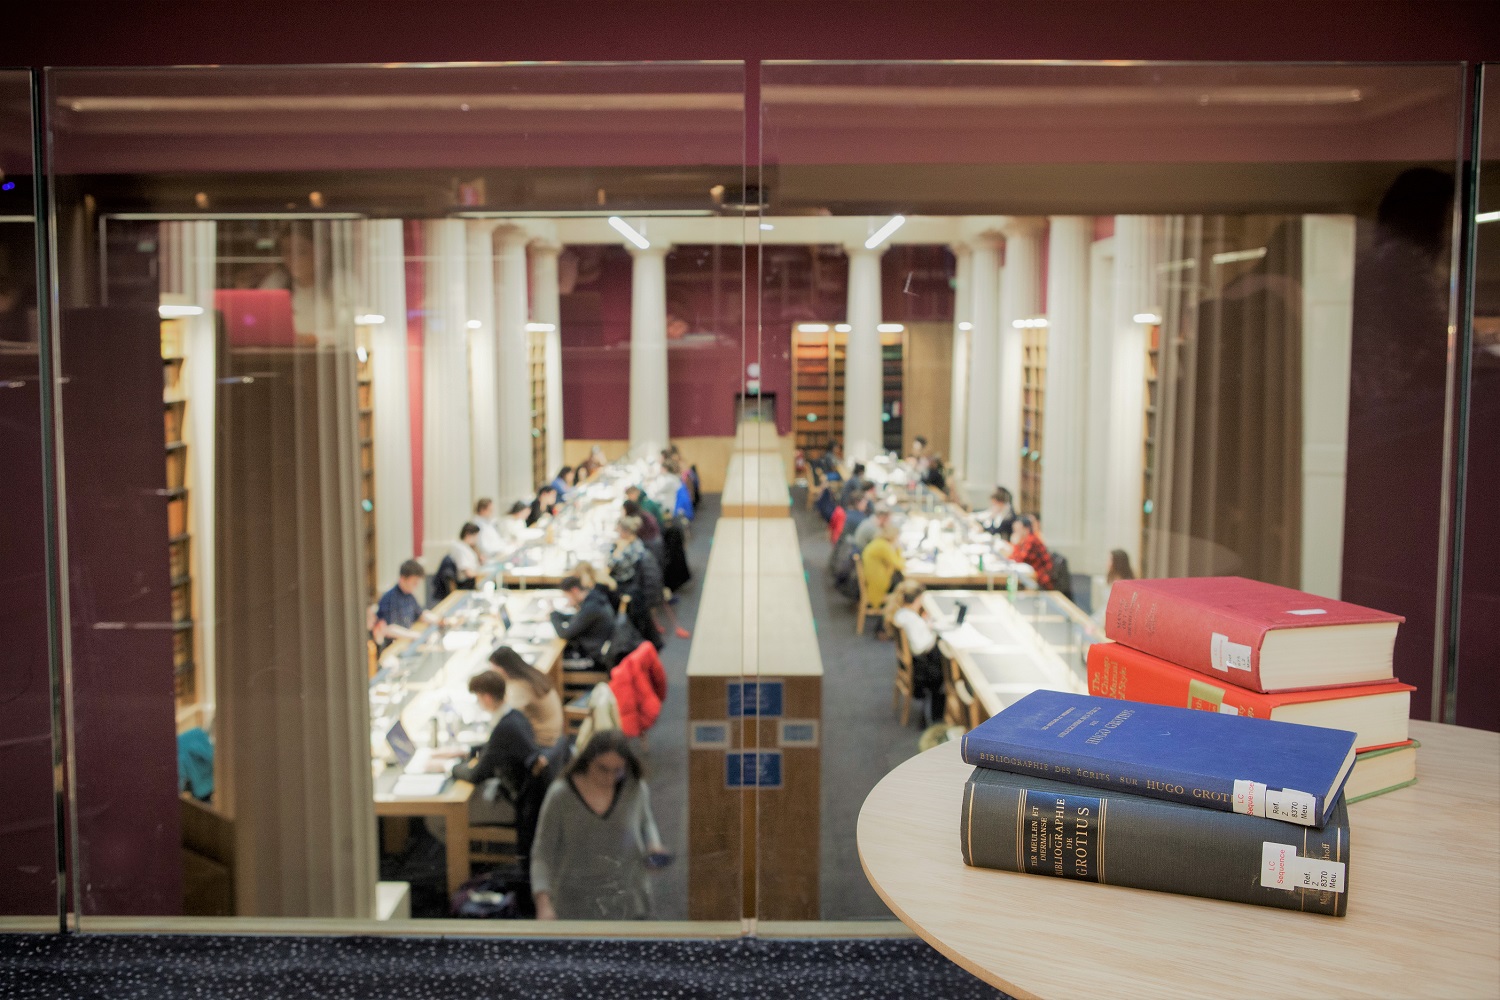 Students studying in the Law Library in Old College. Photo credit: Sam Sills